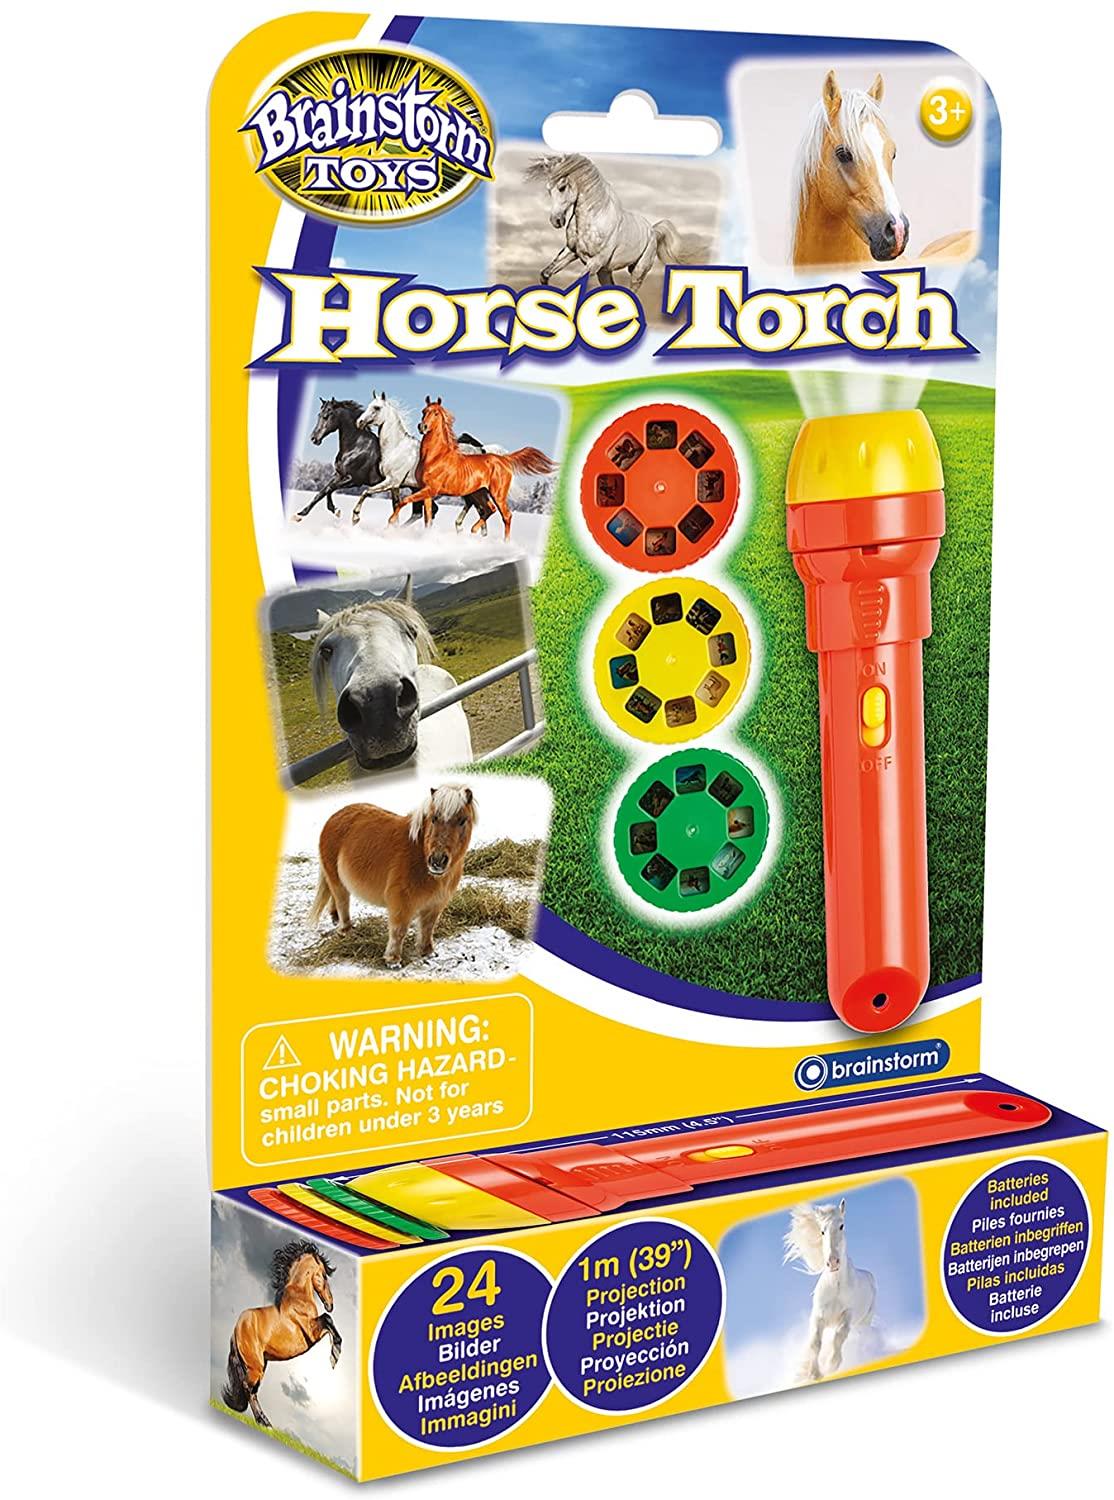 Brainstorm Horse Torch & Projector